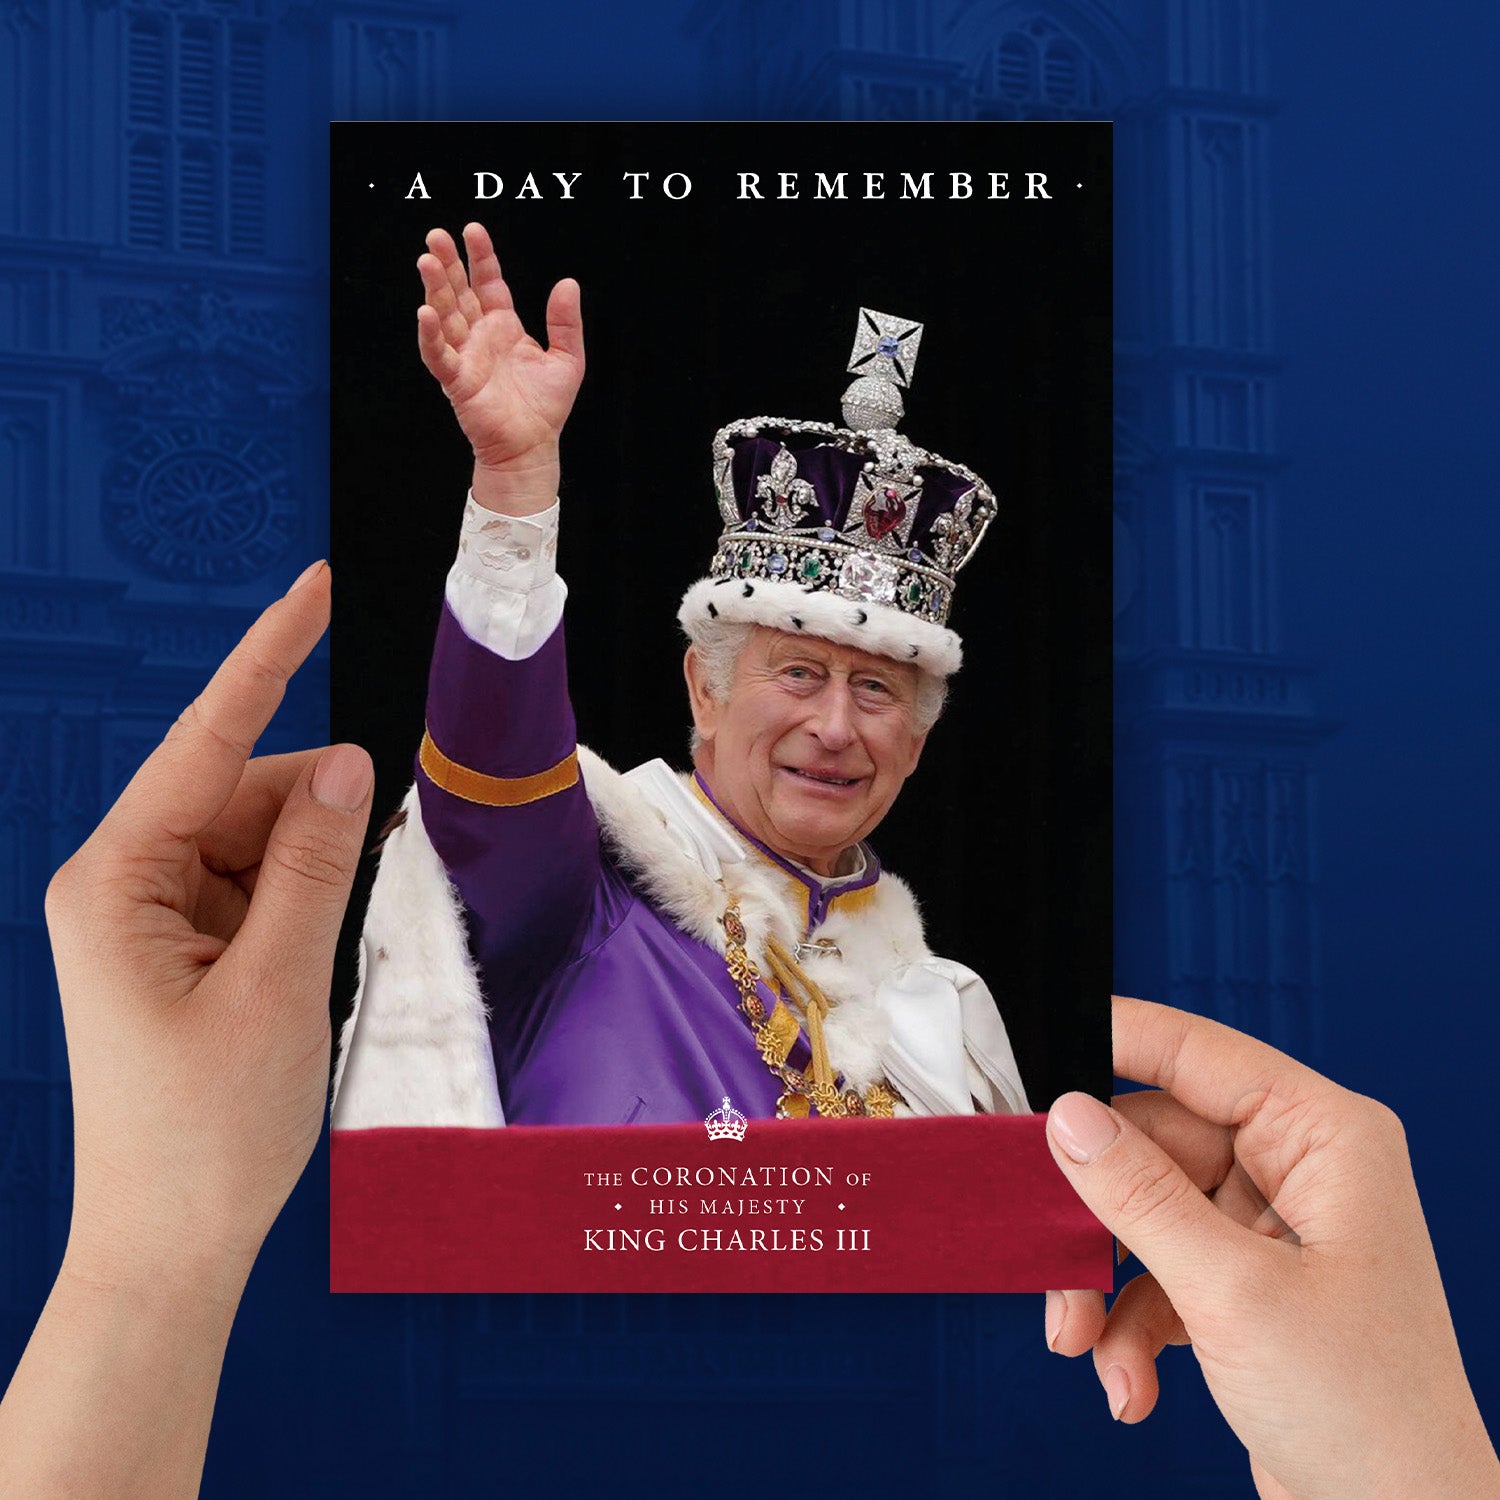 King Charles III Coronation - A Day to Remember